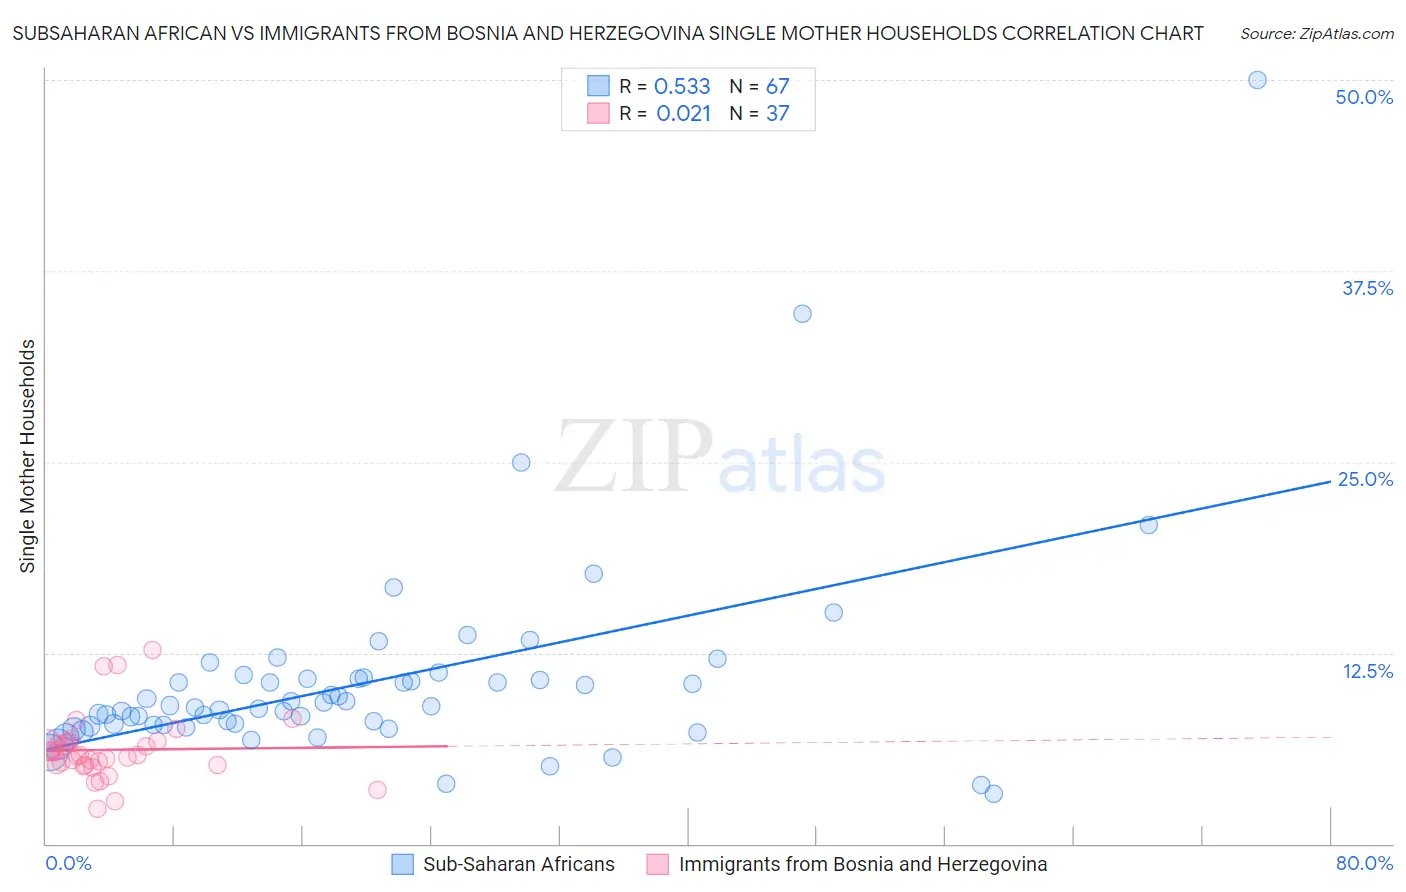 Subsaharan African vs Immigrants from Bosnia and Herzegovina Single Mother Households